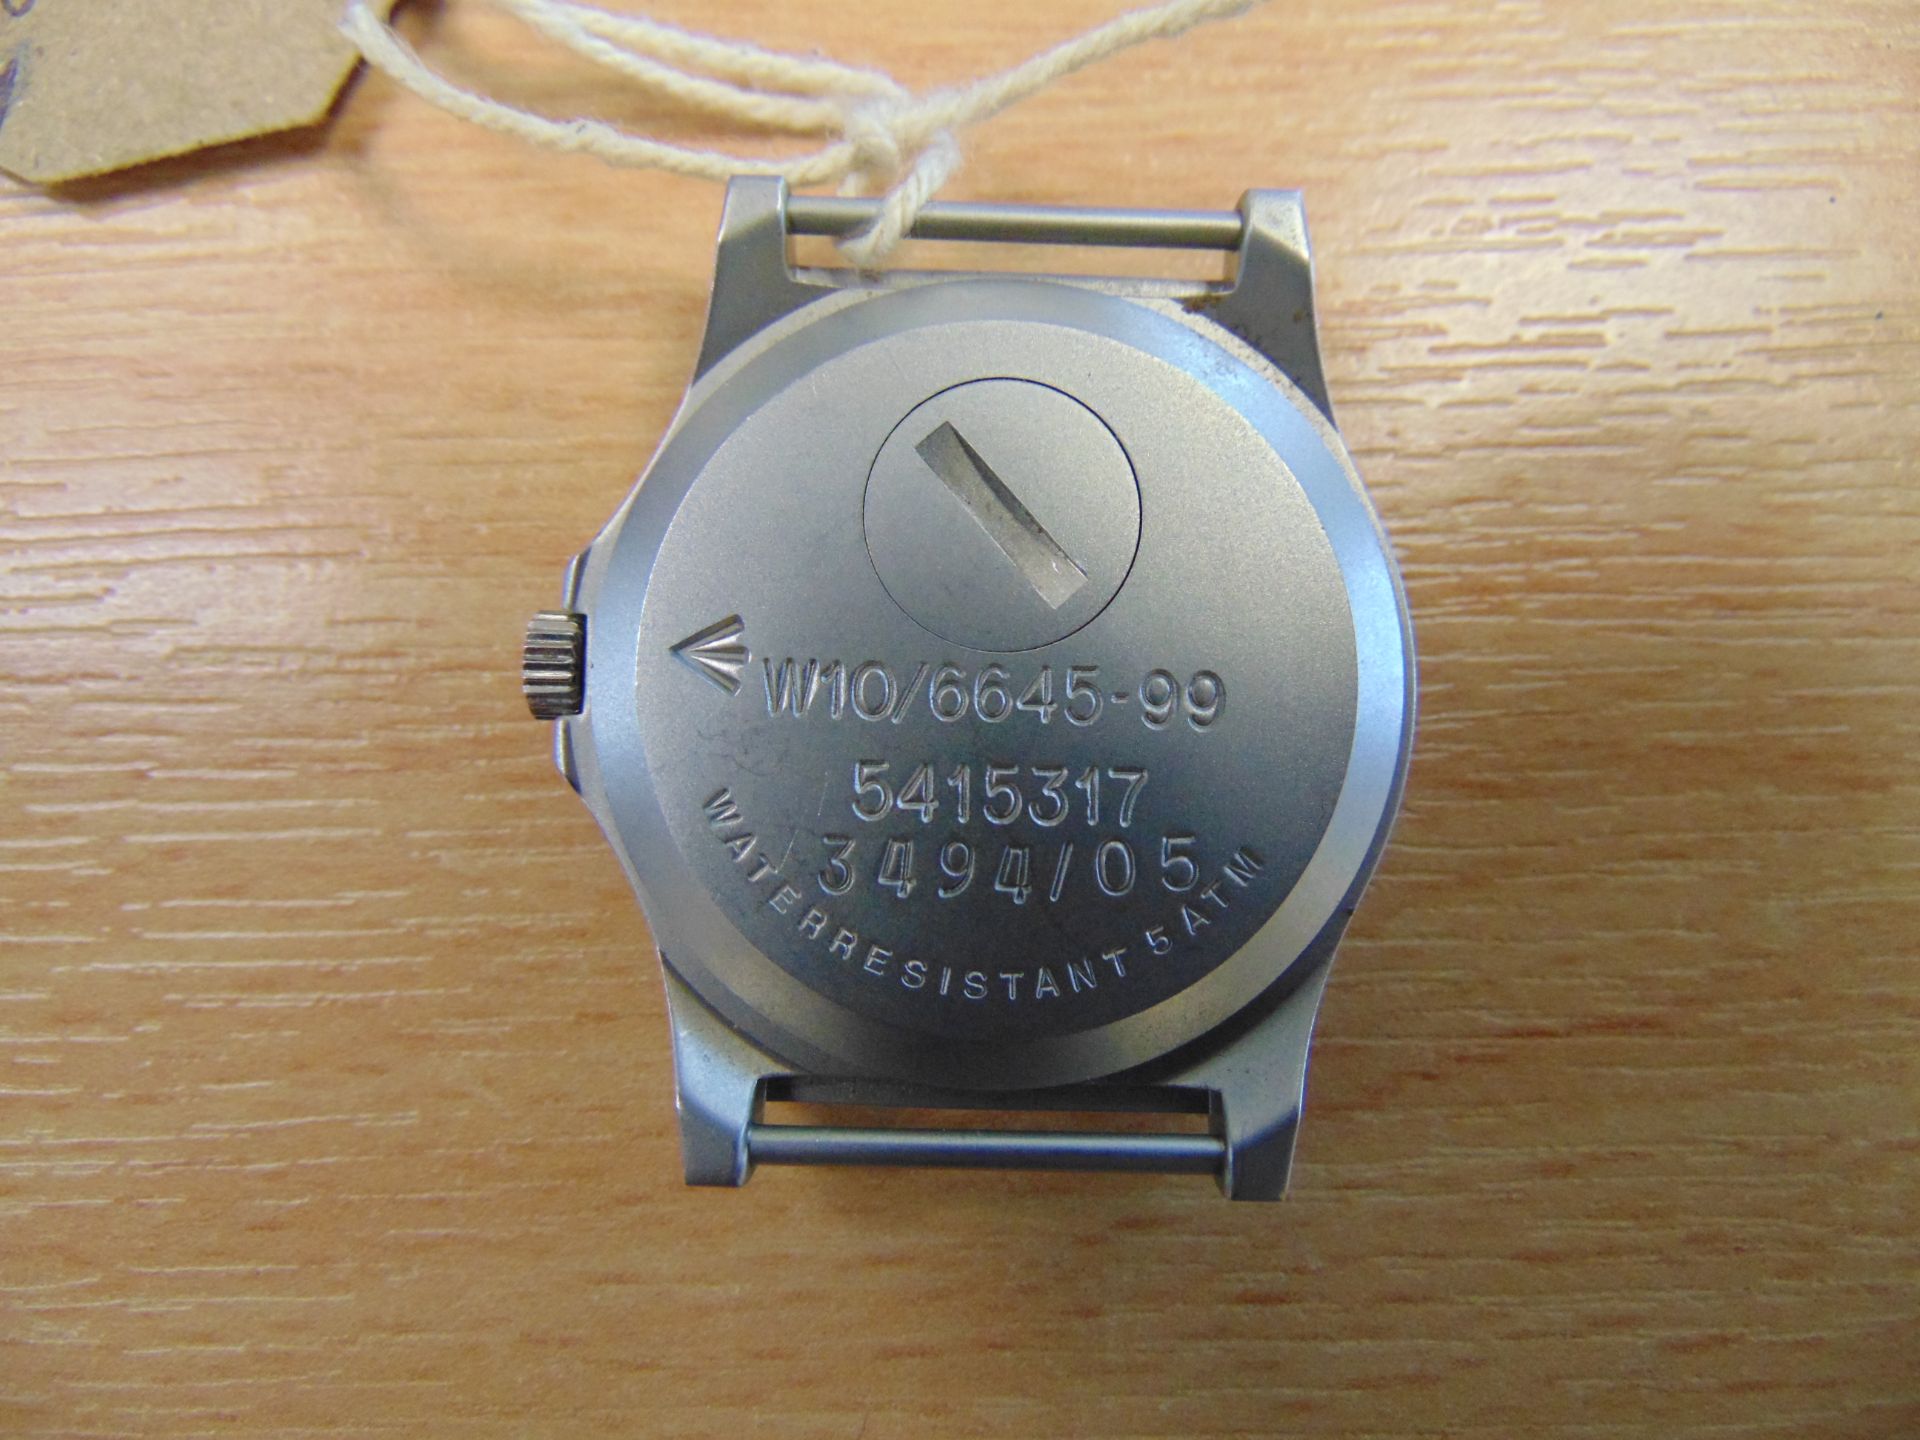 V Nice CWC W10 British Army Service Watch Water Proof to 5ATM Nato Marks, Date 2005, New Battery - Image 3 of 4